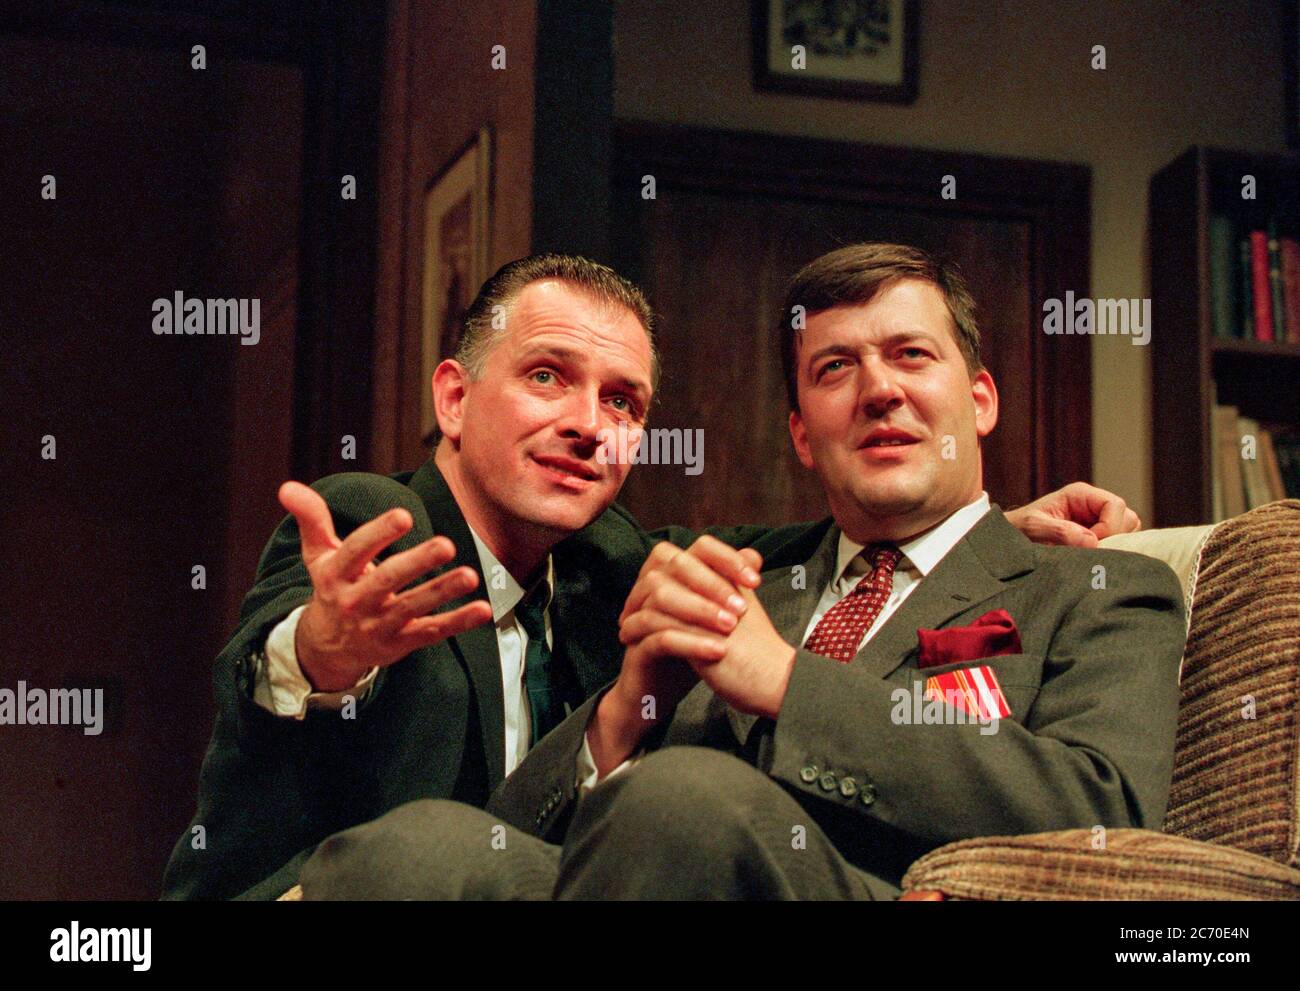 l-r: Rik Mayall (Sean Bourke), Stephen Fry (George Blake) in CELL MATES by Simon Gray at the Albery Theatre, London WC2  16/02/1995  set design: Eileen Diss  costumes: Dany Everett  lighting: Mick Hughes  director: Simon Gray Stock Photo